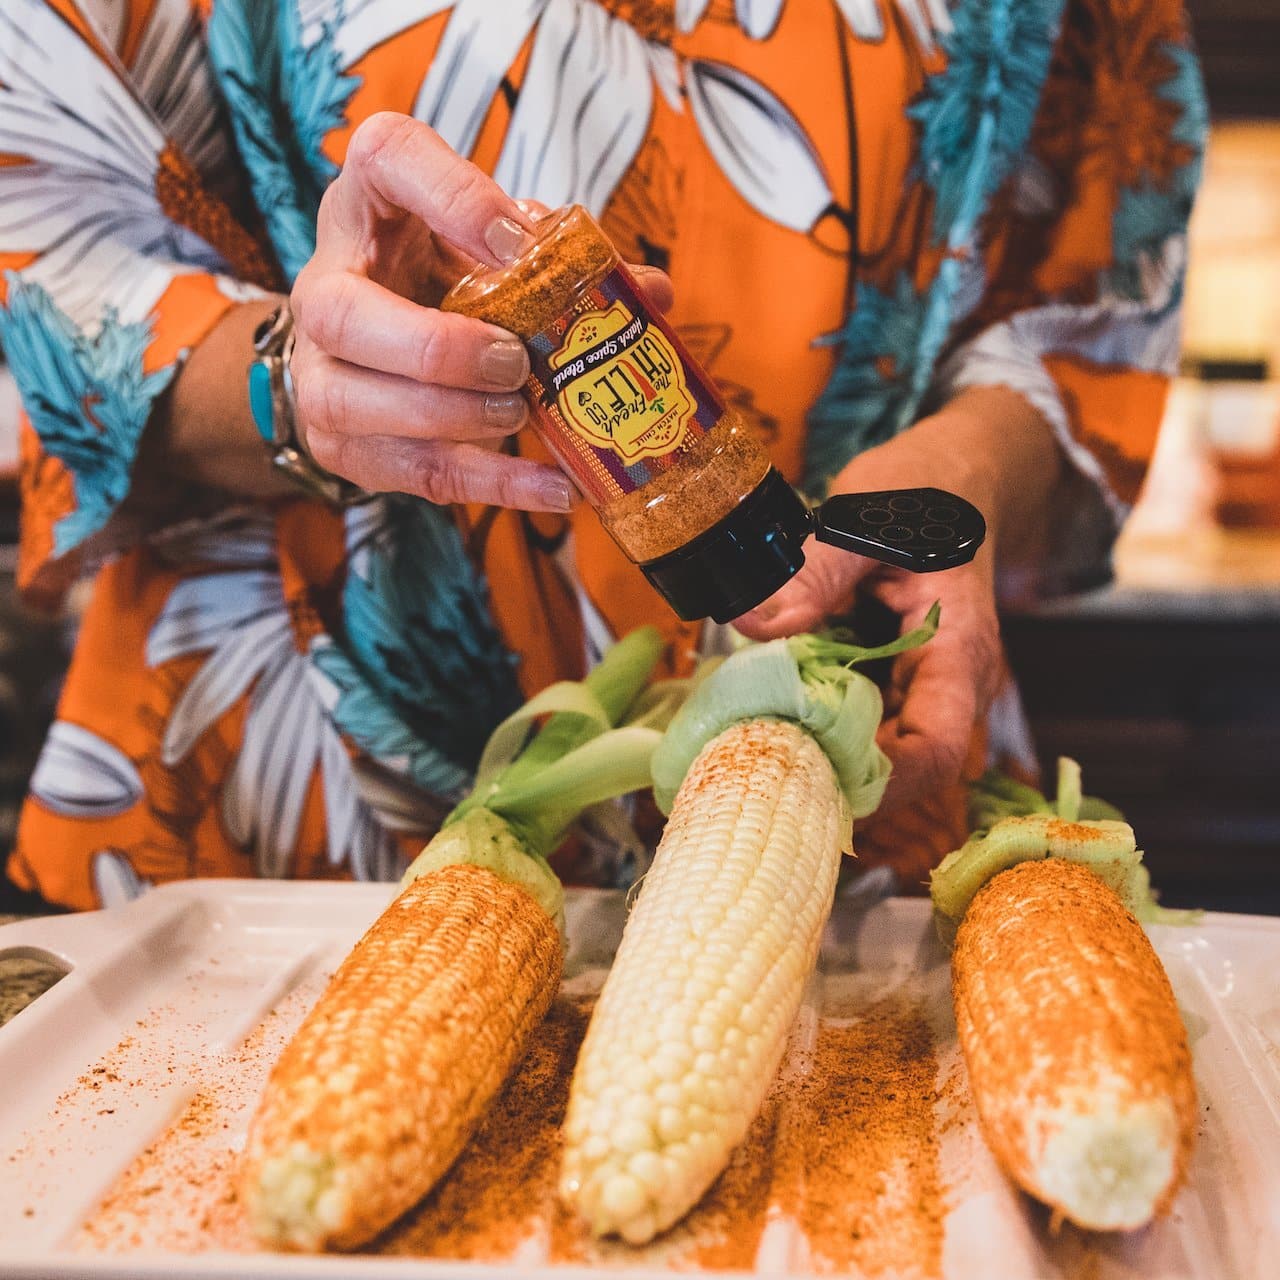 A person in a colorful shirt sprinkles Hatch Red Chile Spice Blend from a bottle onto fresh corn cobs laid out on a tray.